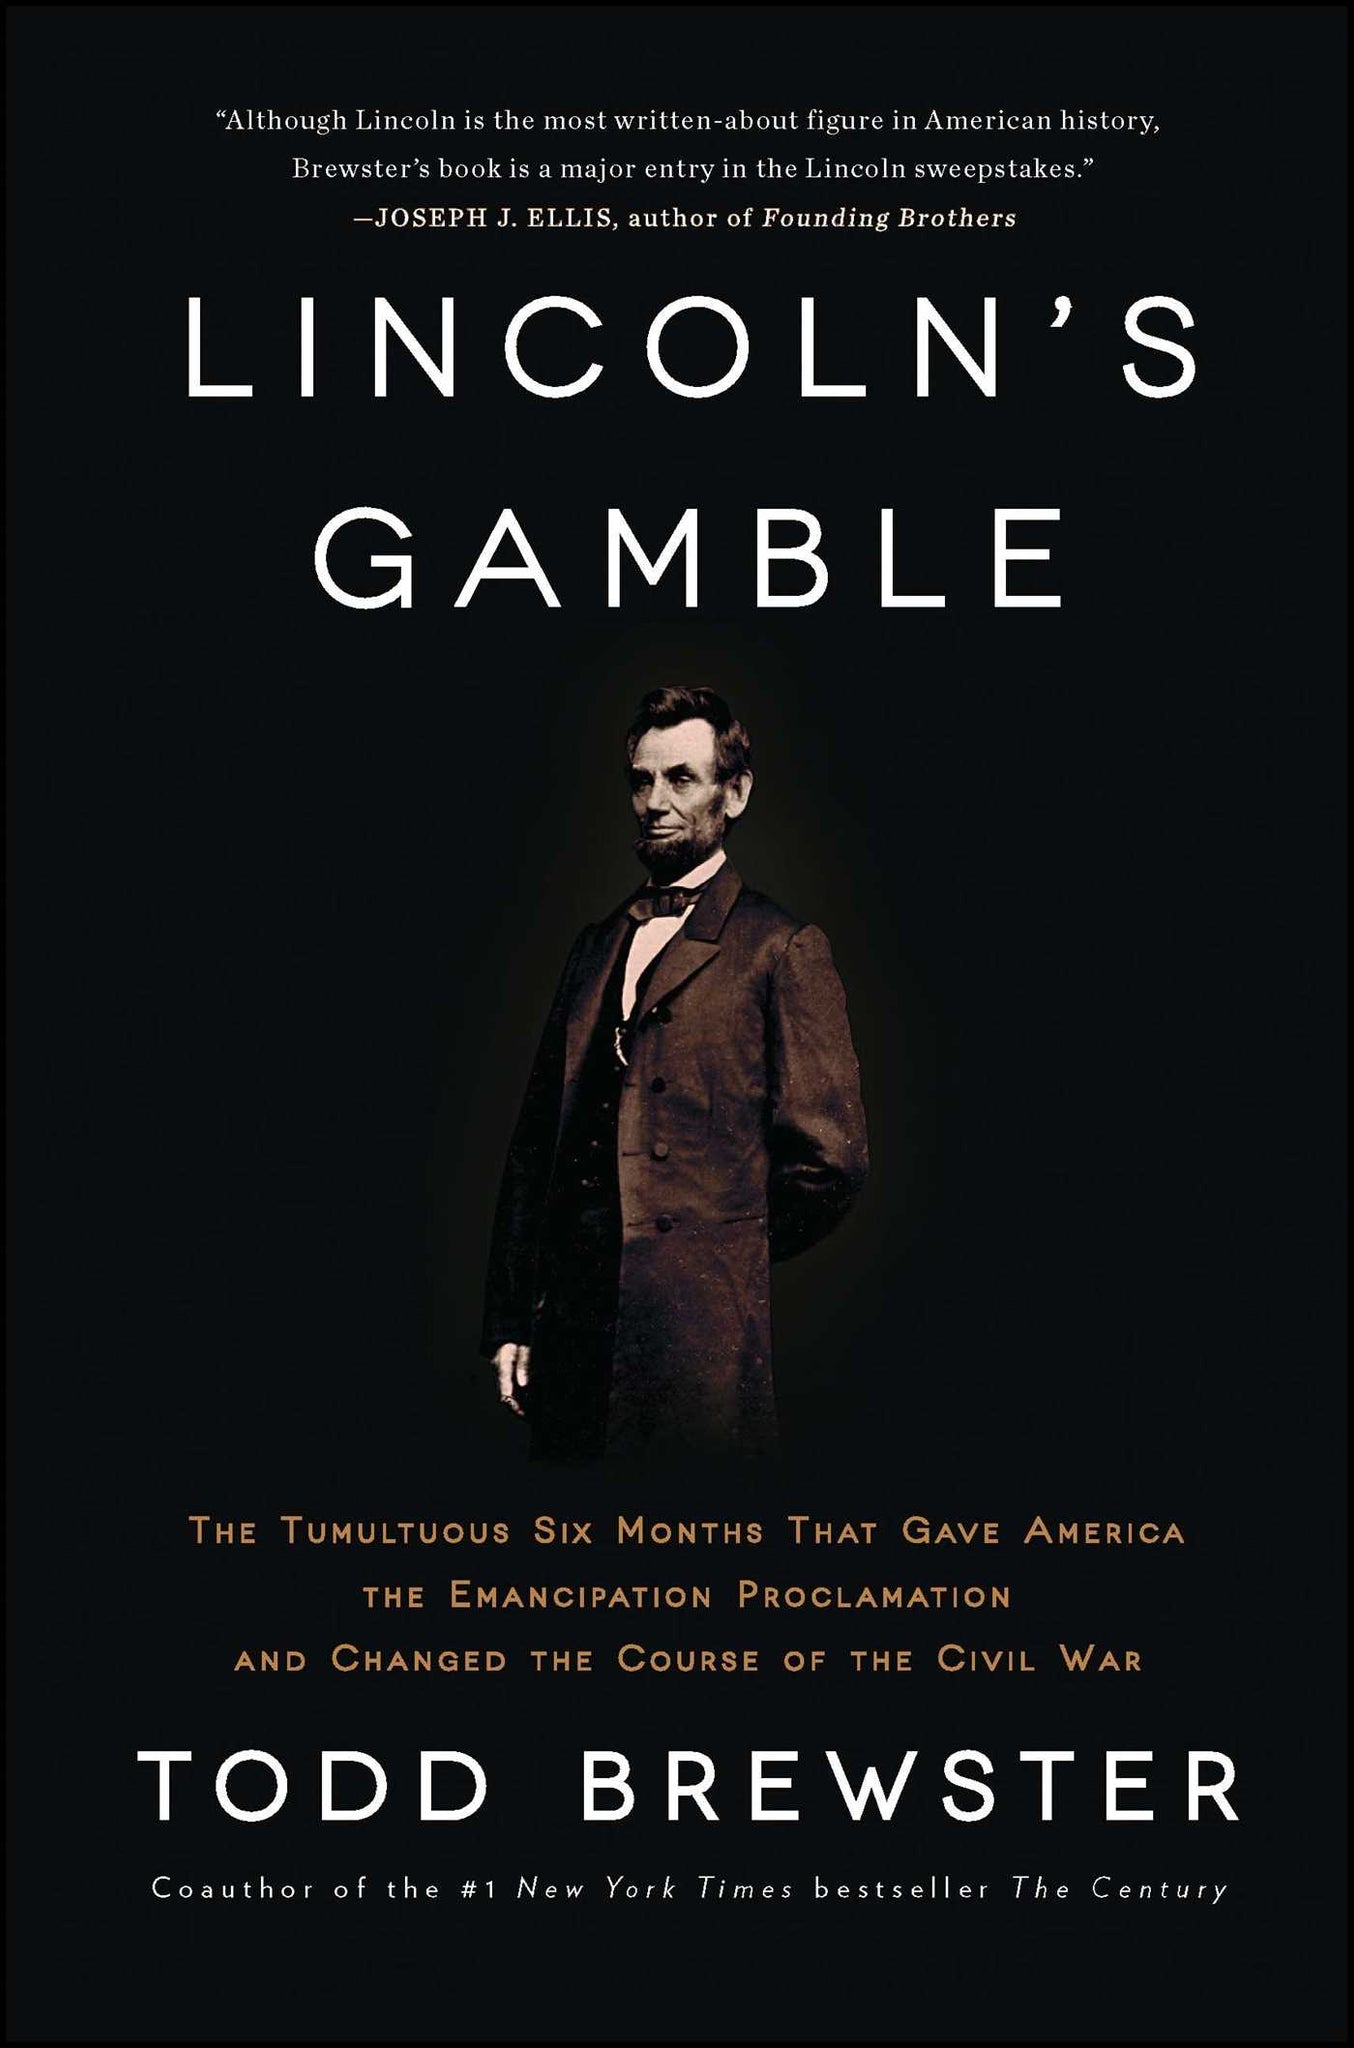 Lincoln's Gamble : The Tumultuous Six Months that Gave America the Emancipation Proclamation and Changed the Course of the Civil War